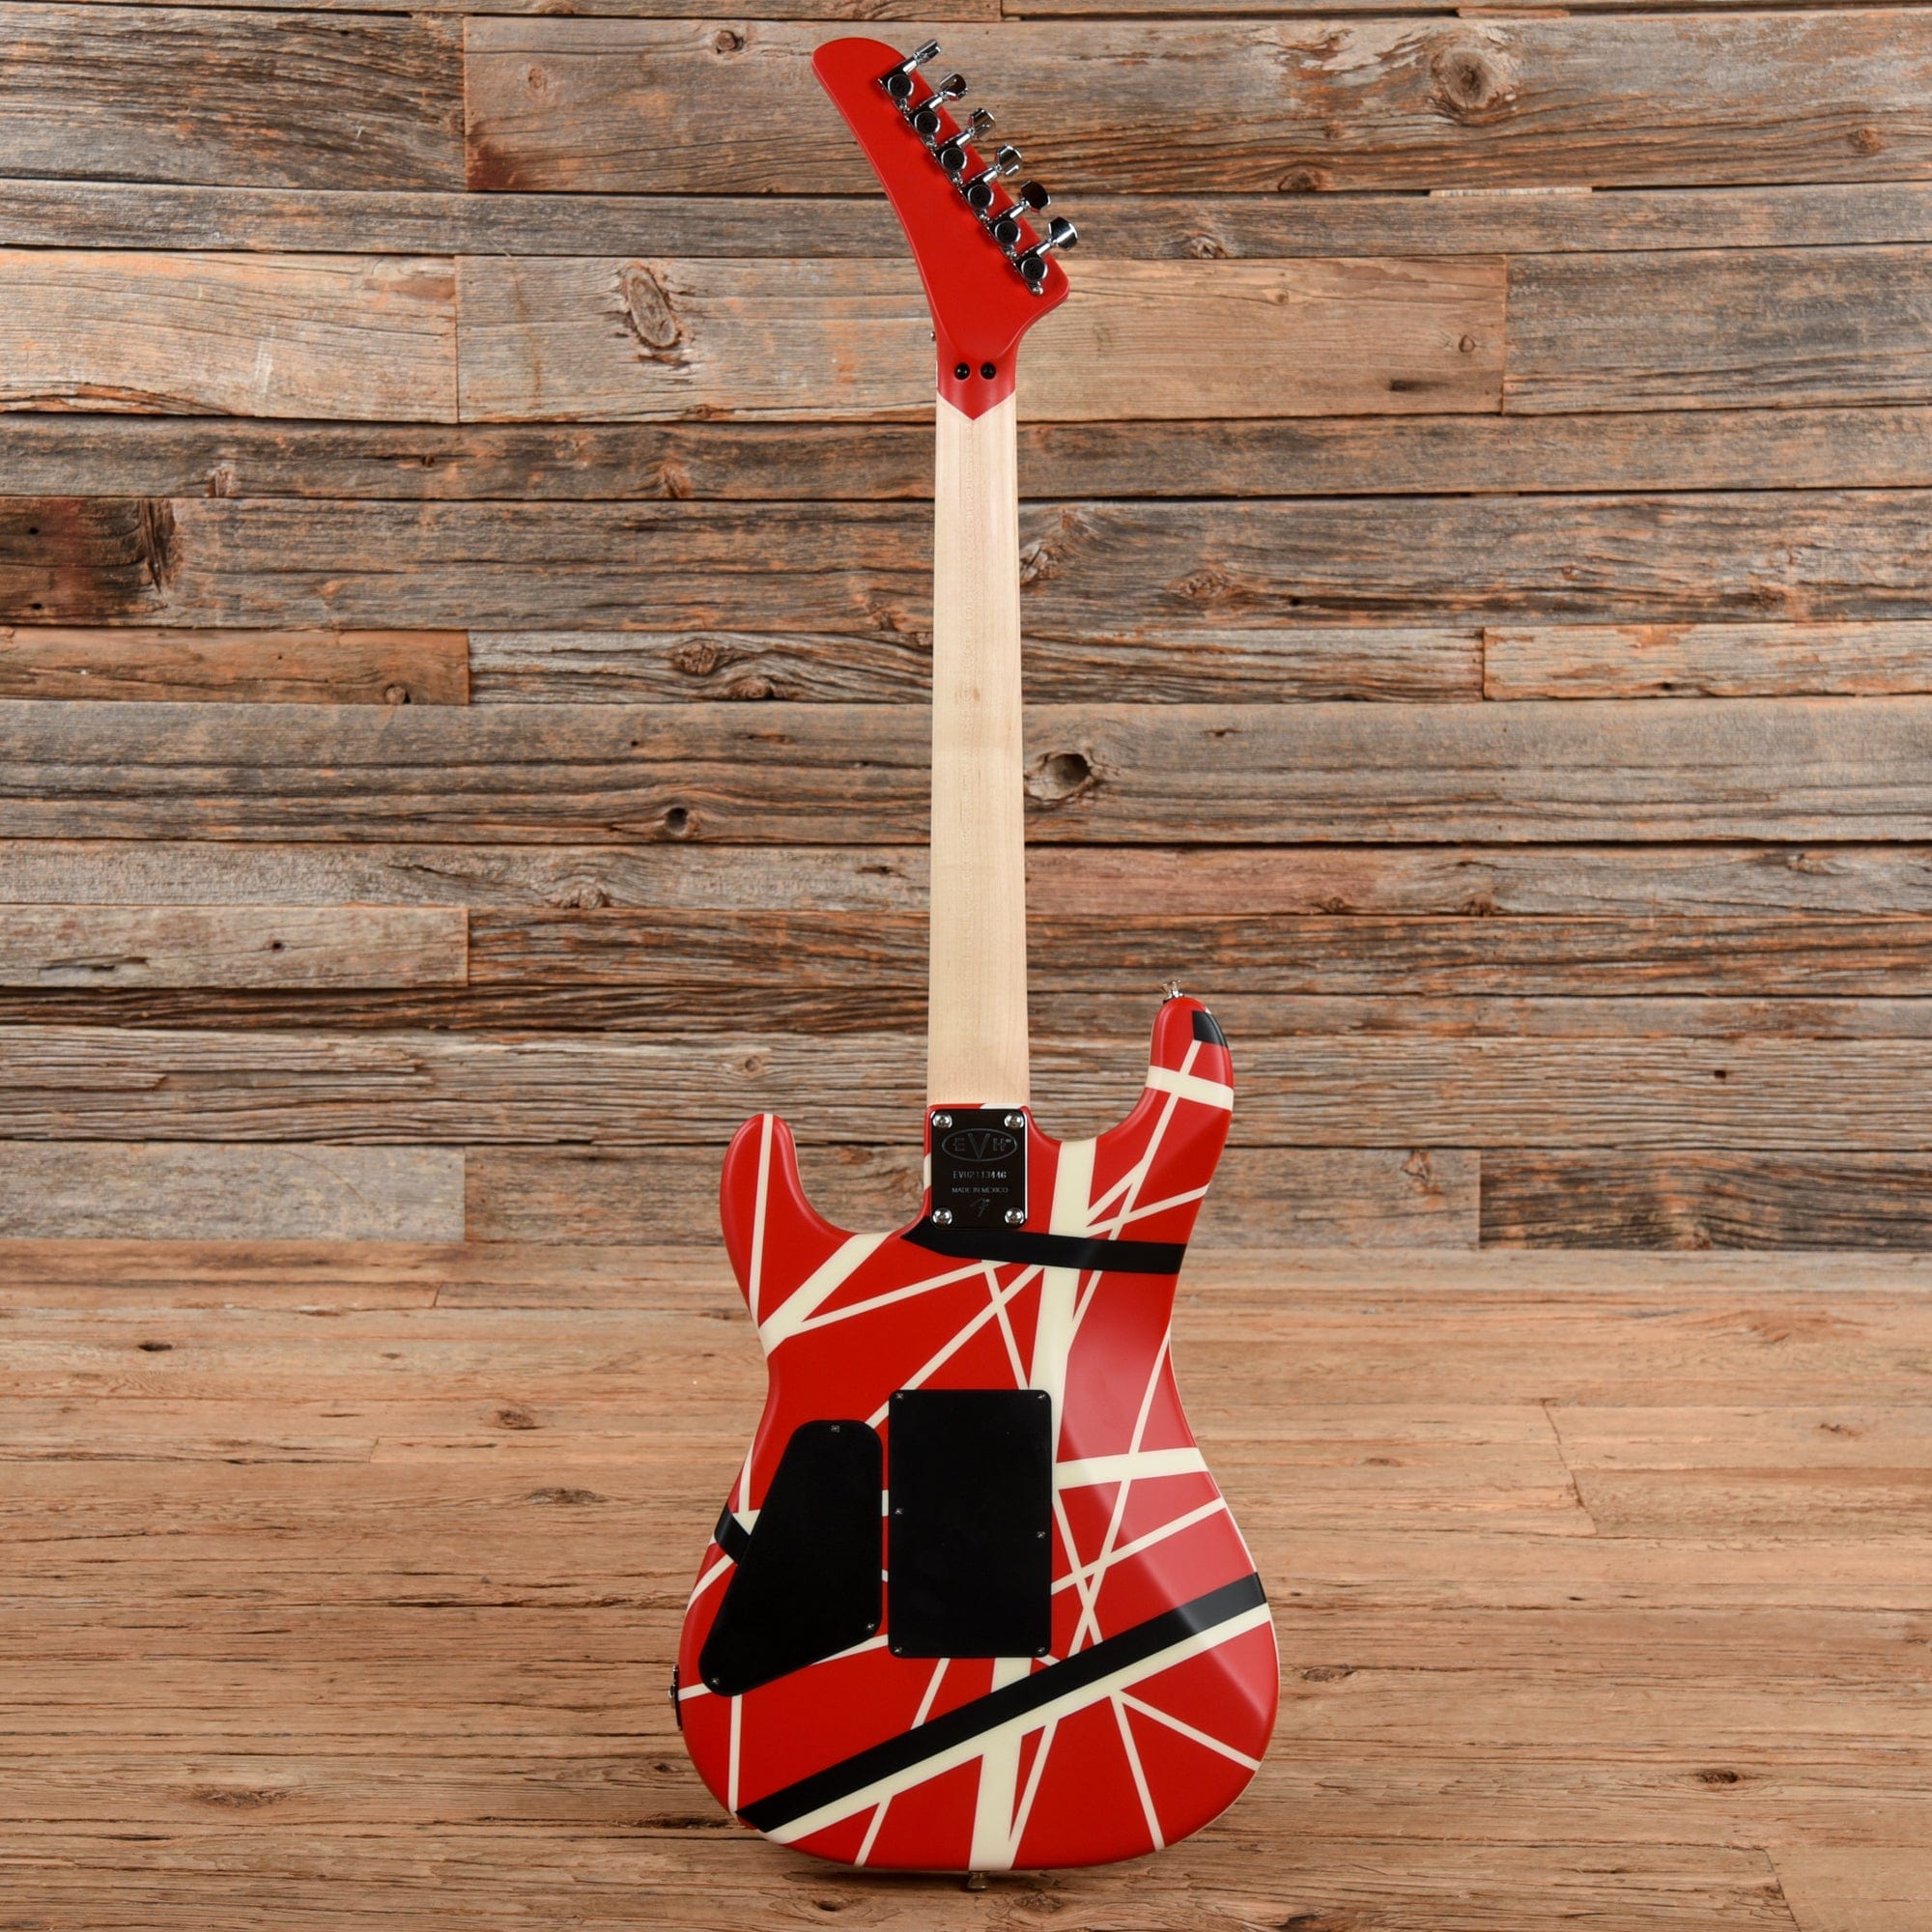 EVH 5150 Striped Series Red/White/Black 2021 Electric Guitars / Solid Body